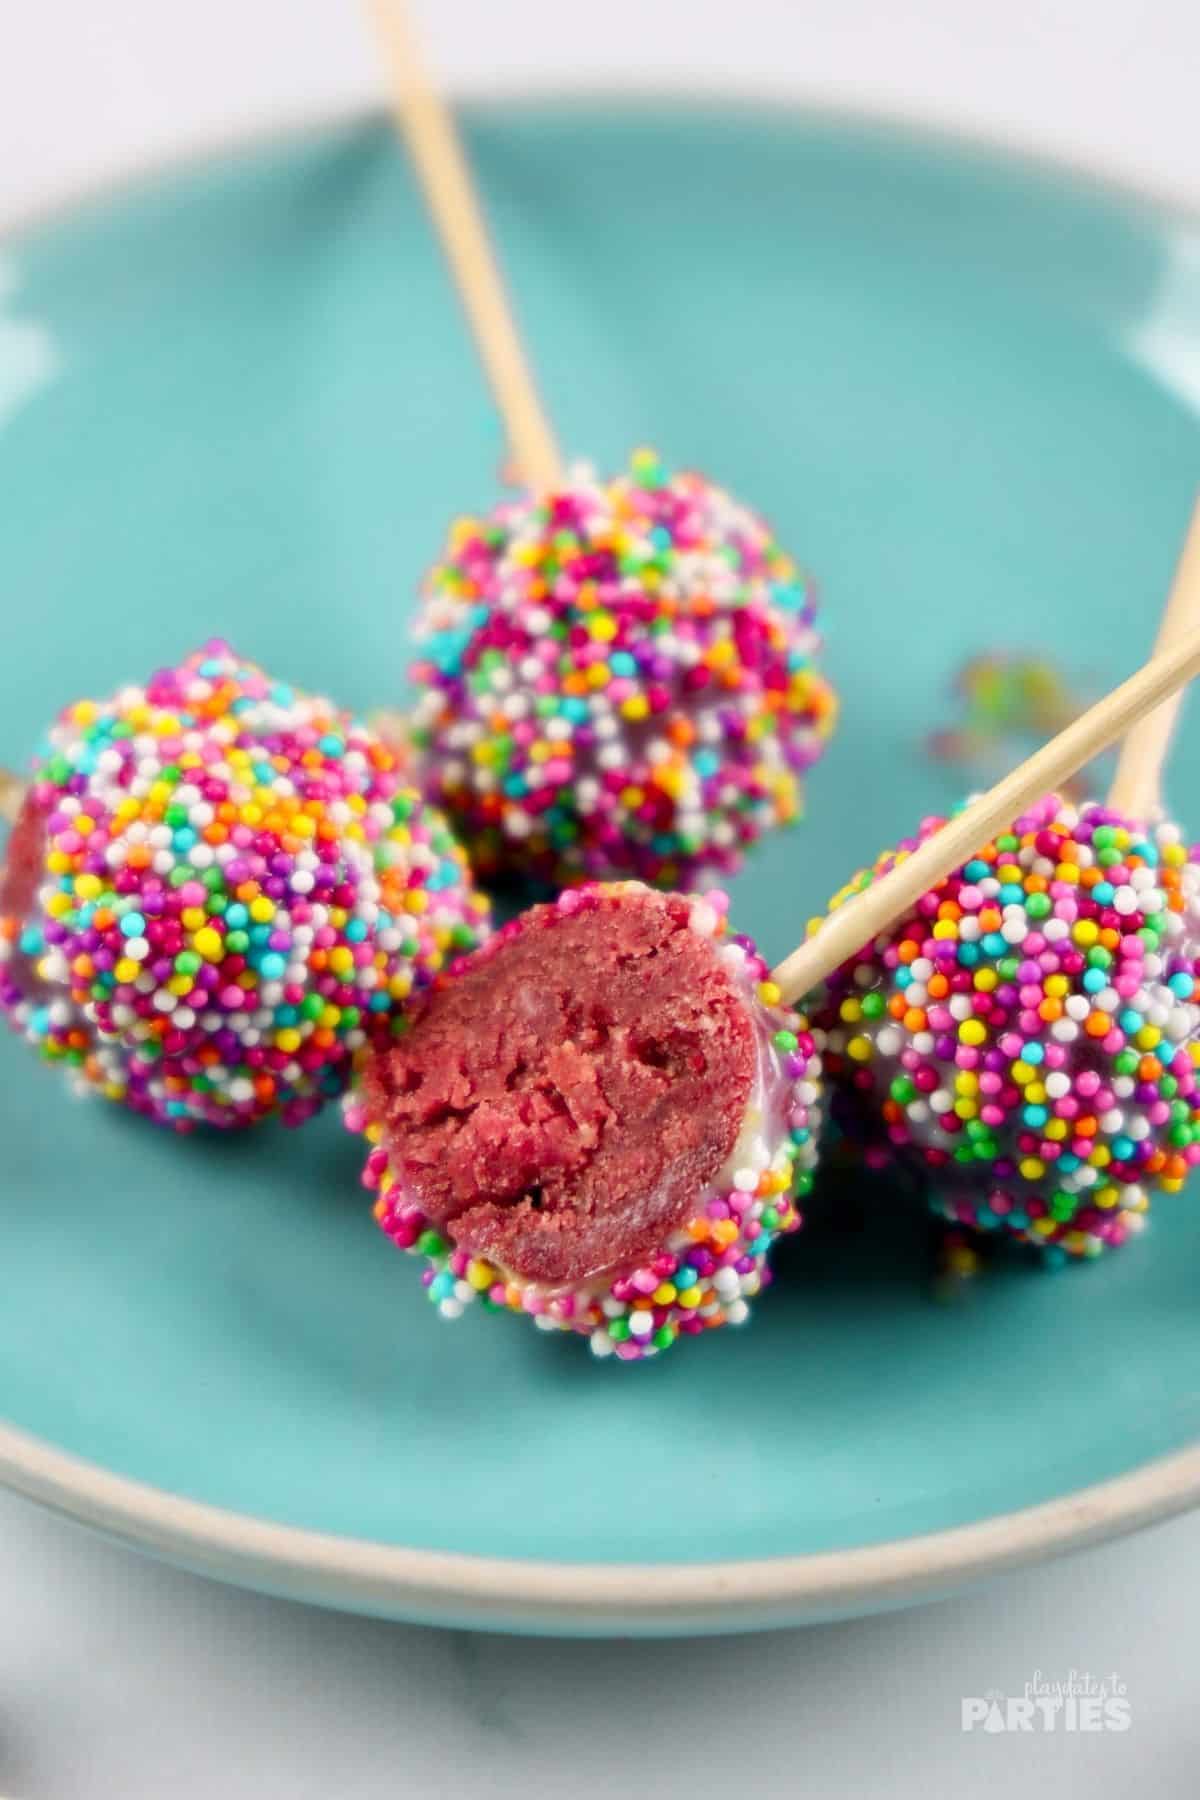 A cake pop is cut in half to show the red velvet interior.